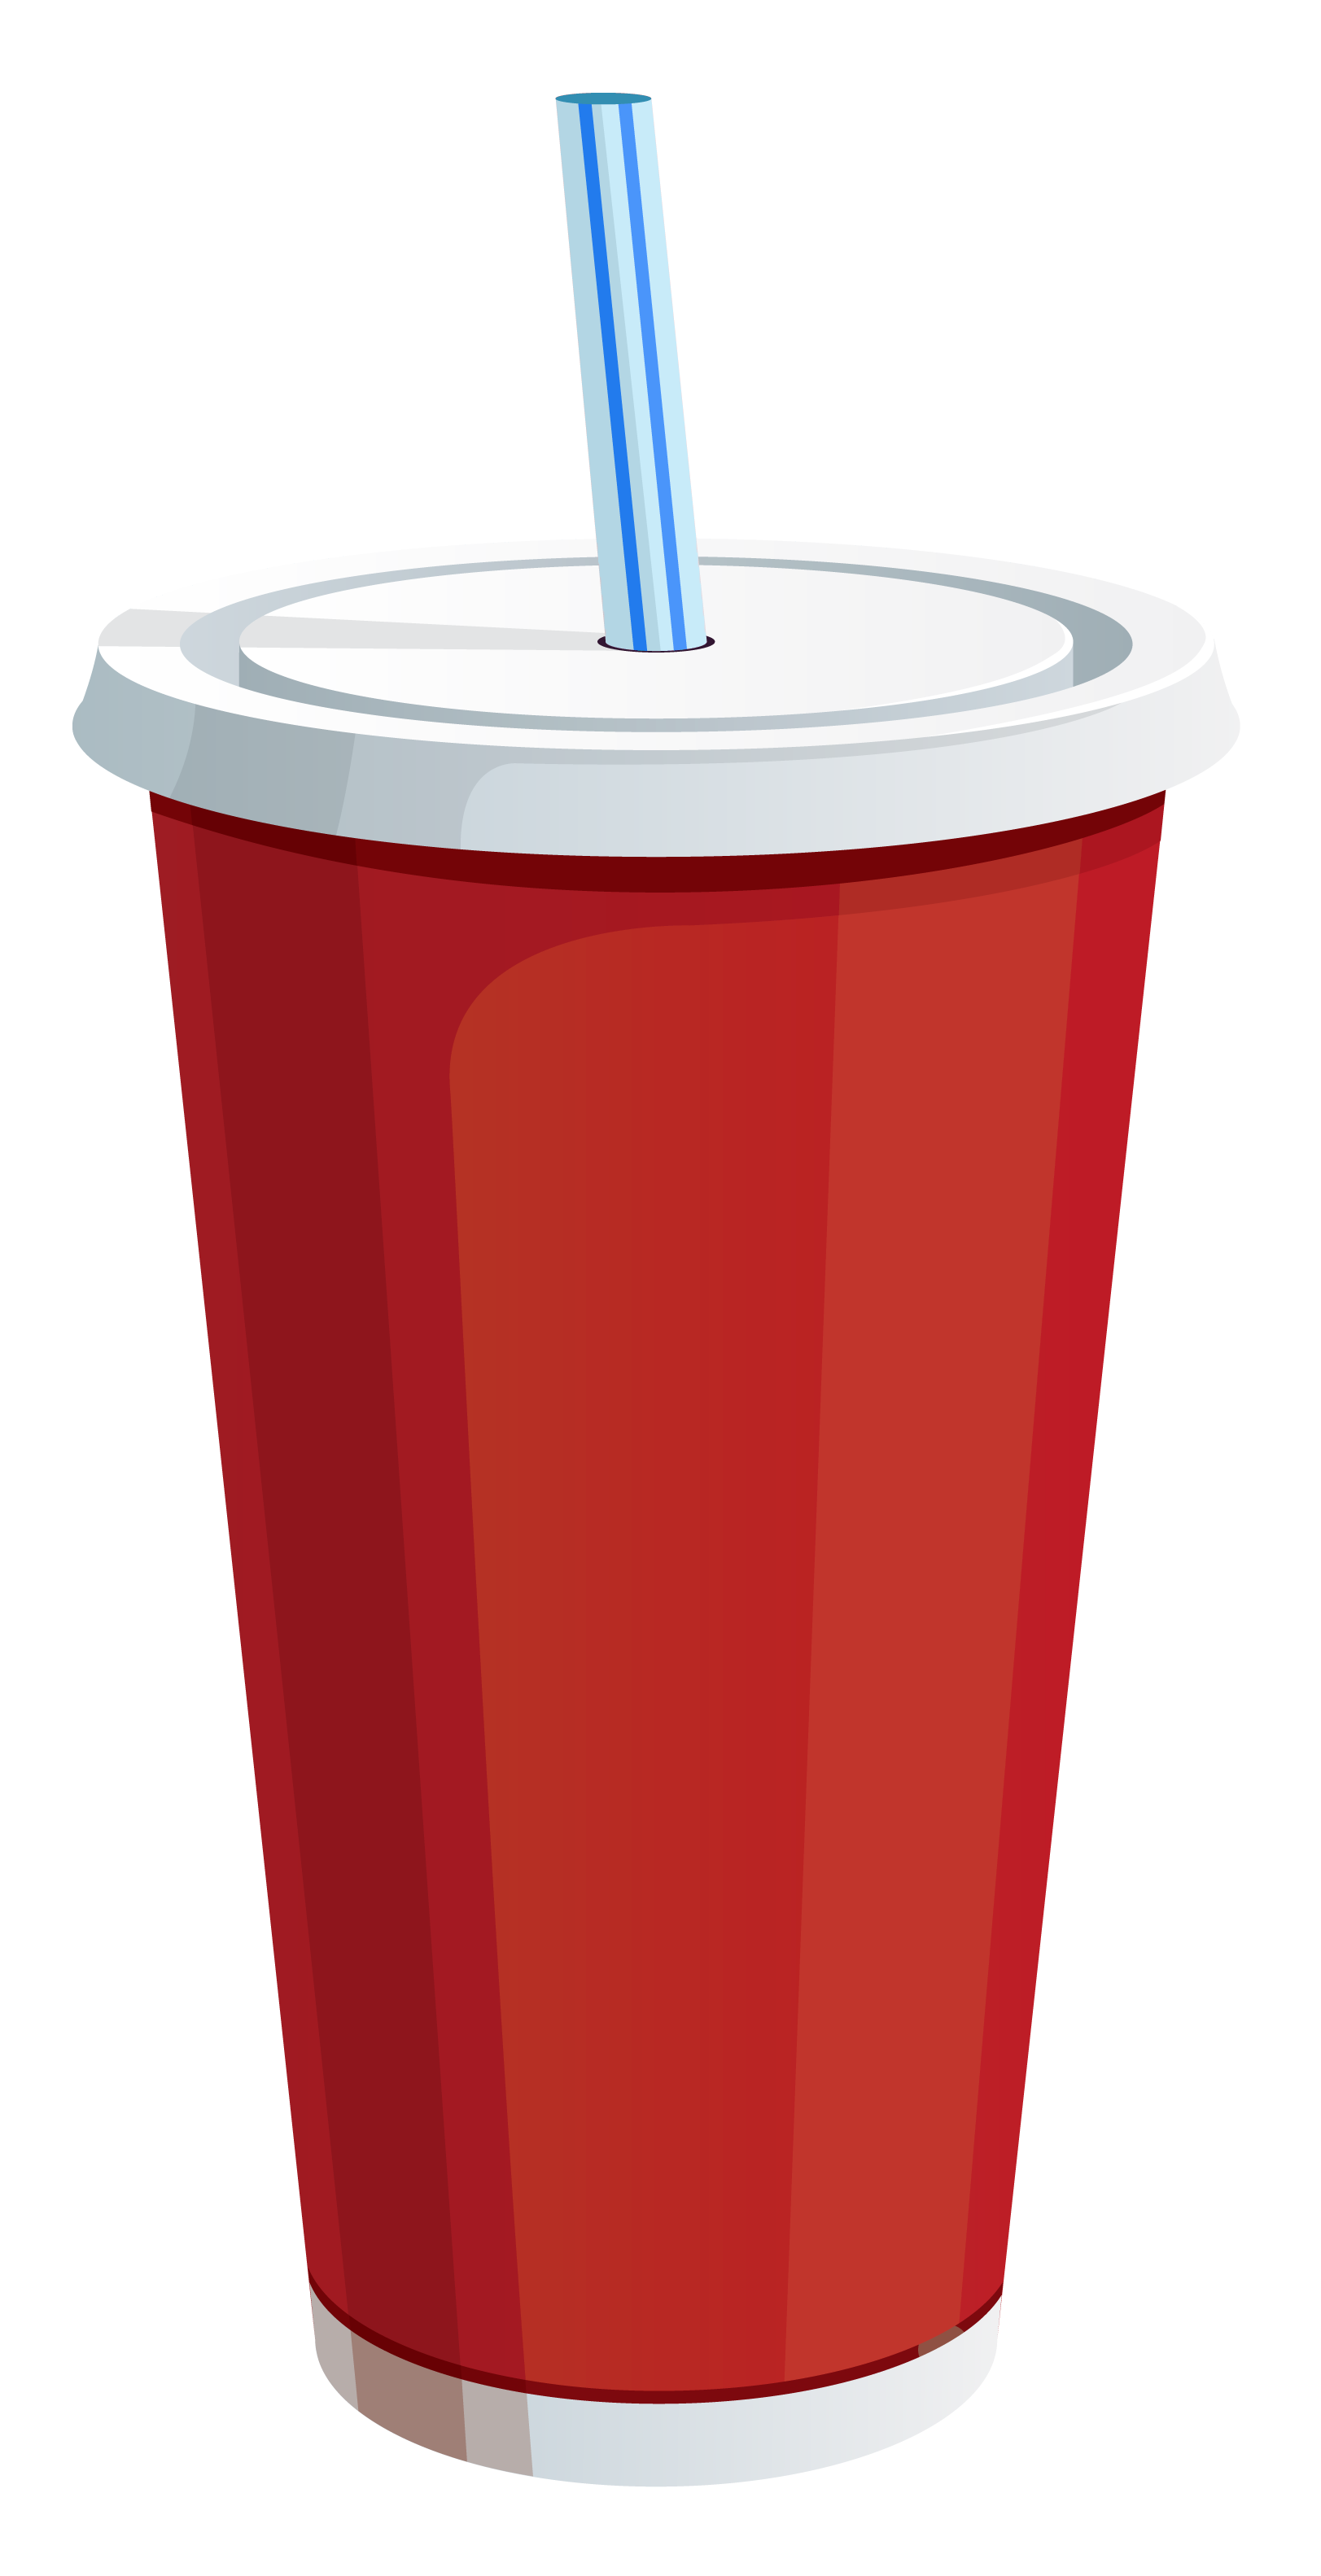 Drinking cup clipart